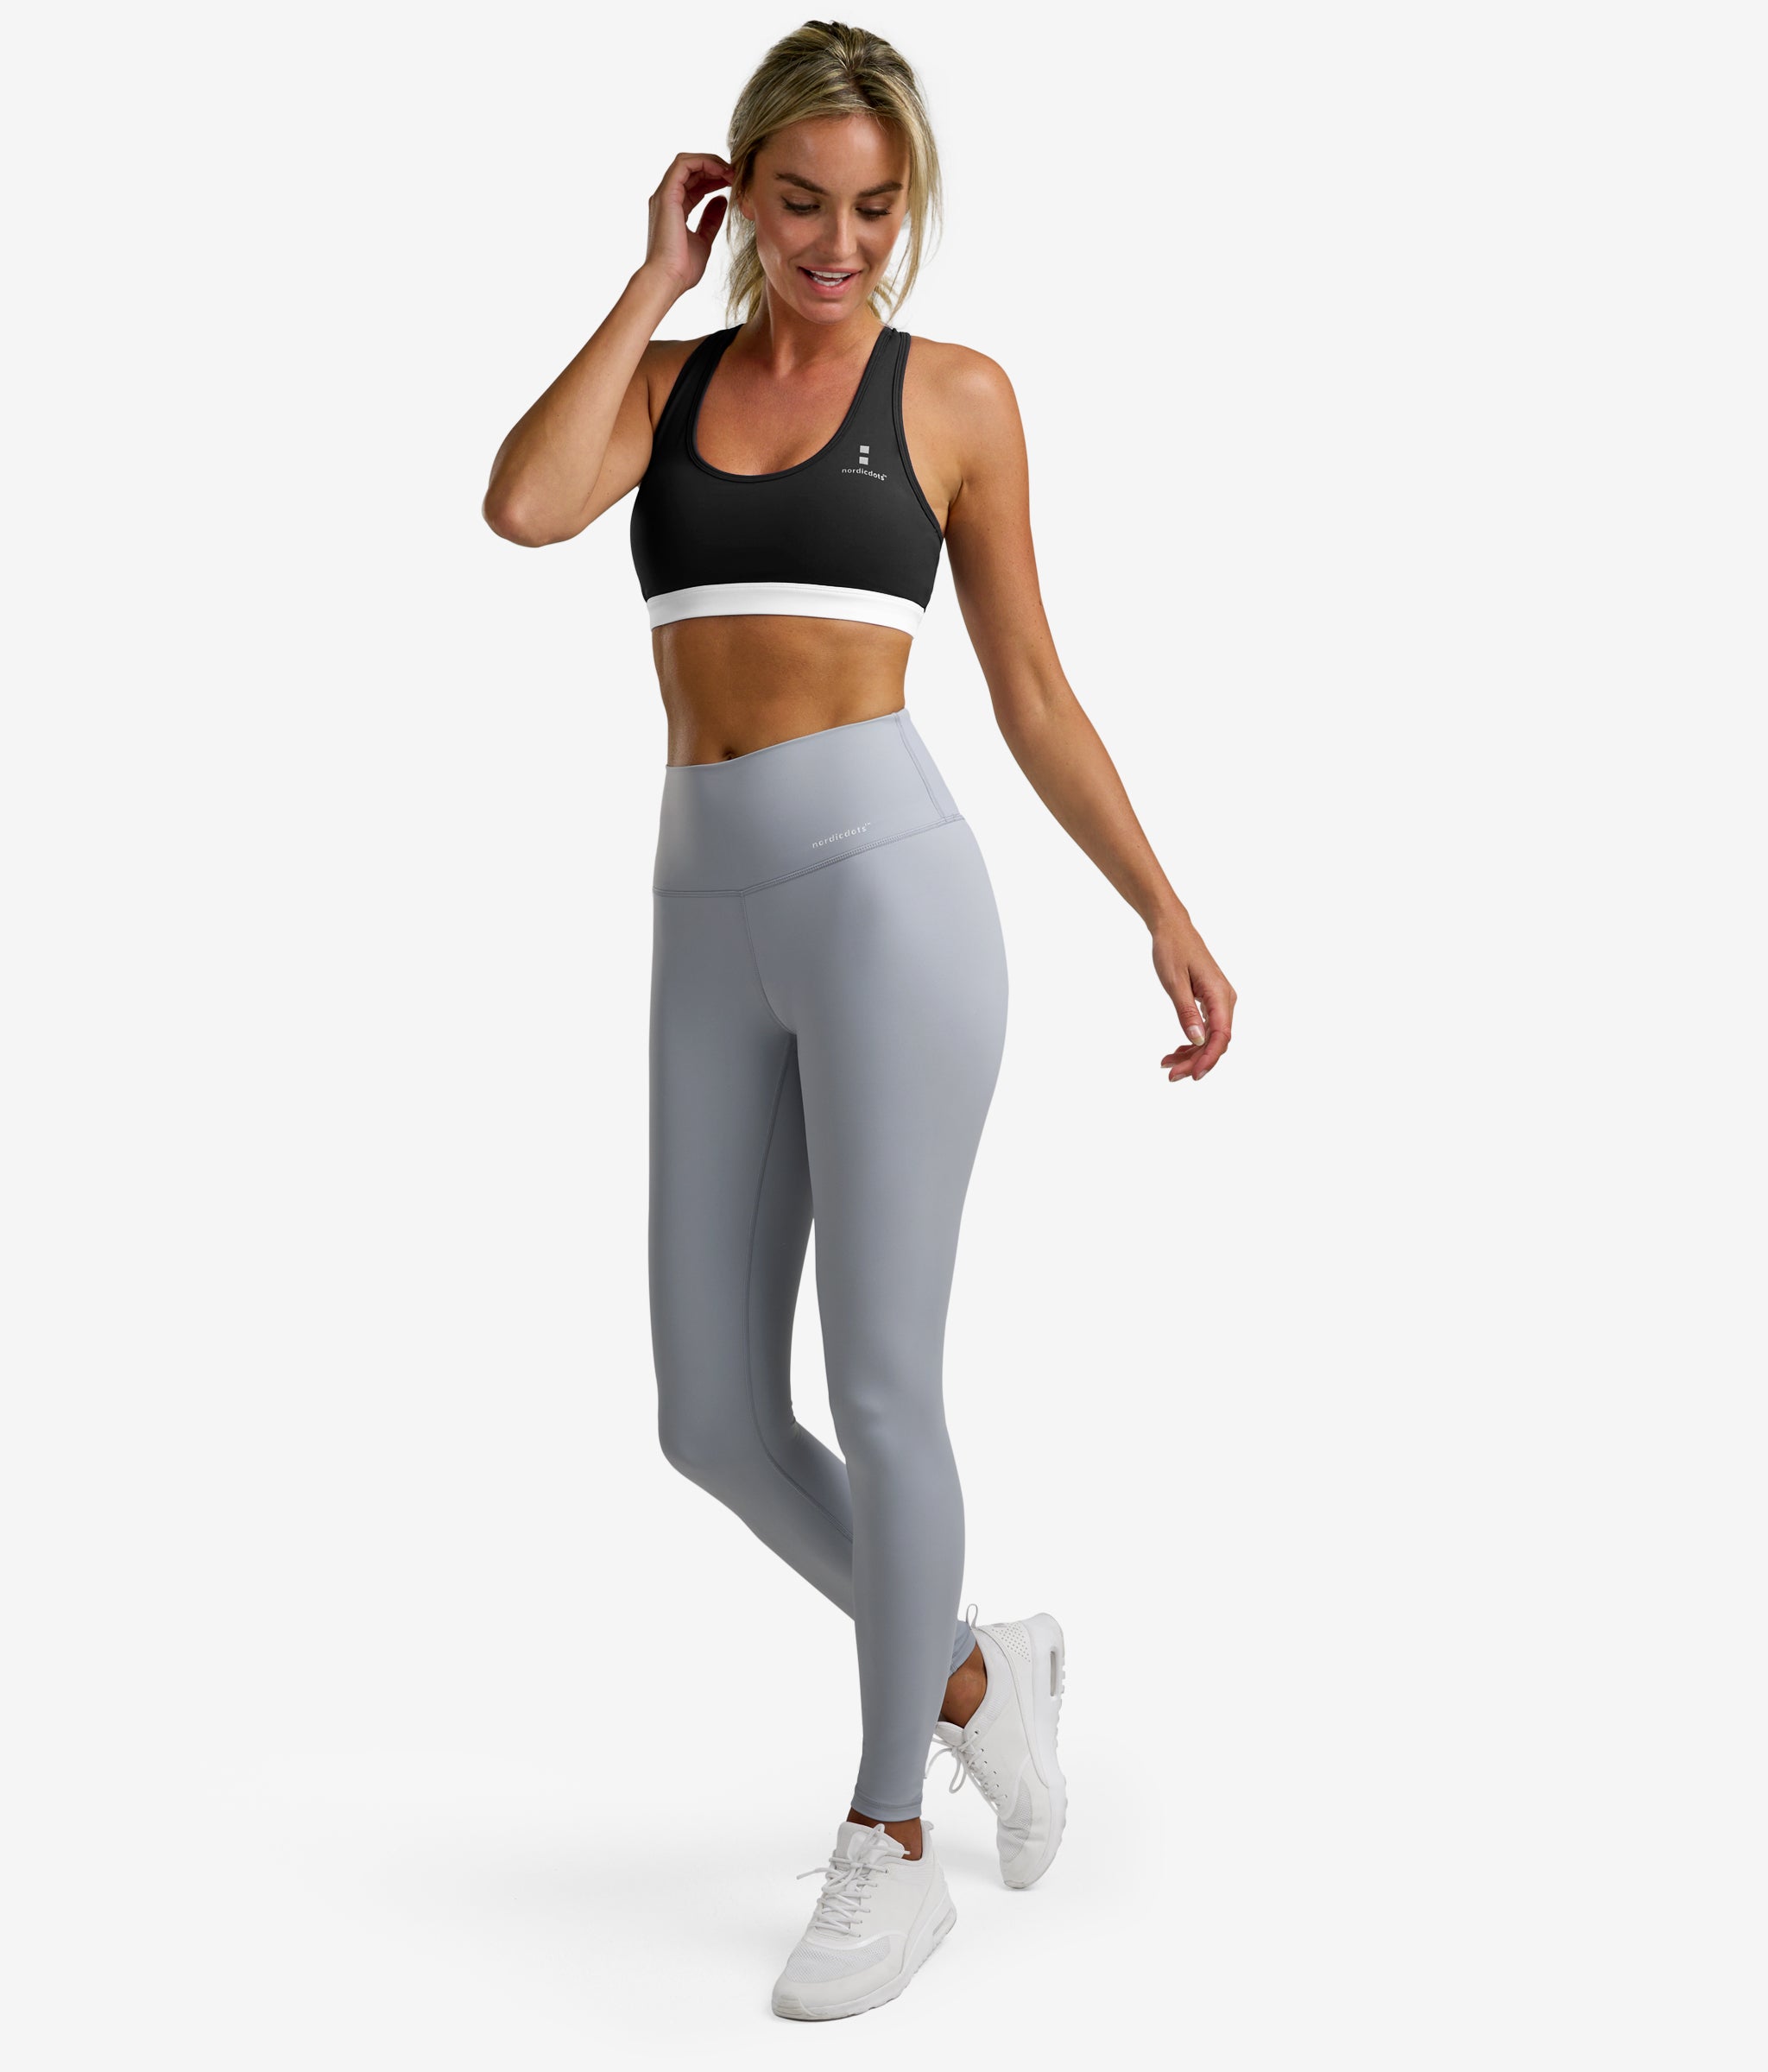 nordicdots leggings for tennis and padel in light grey color